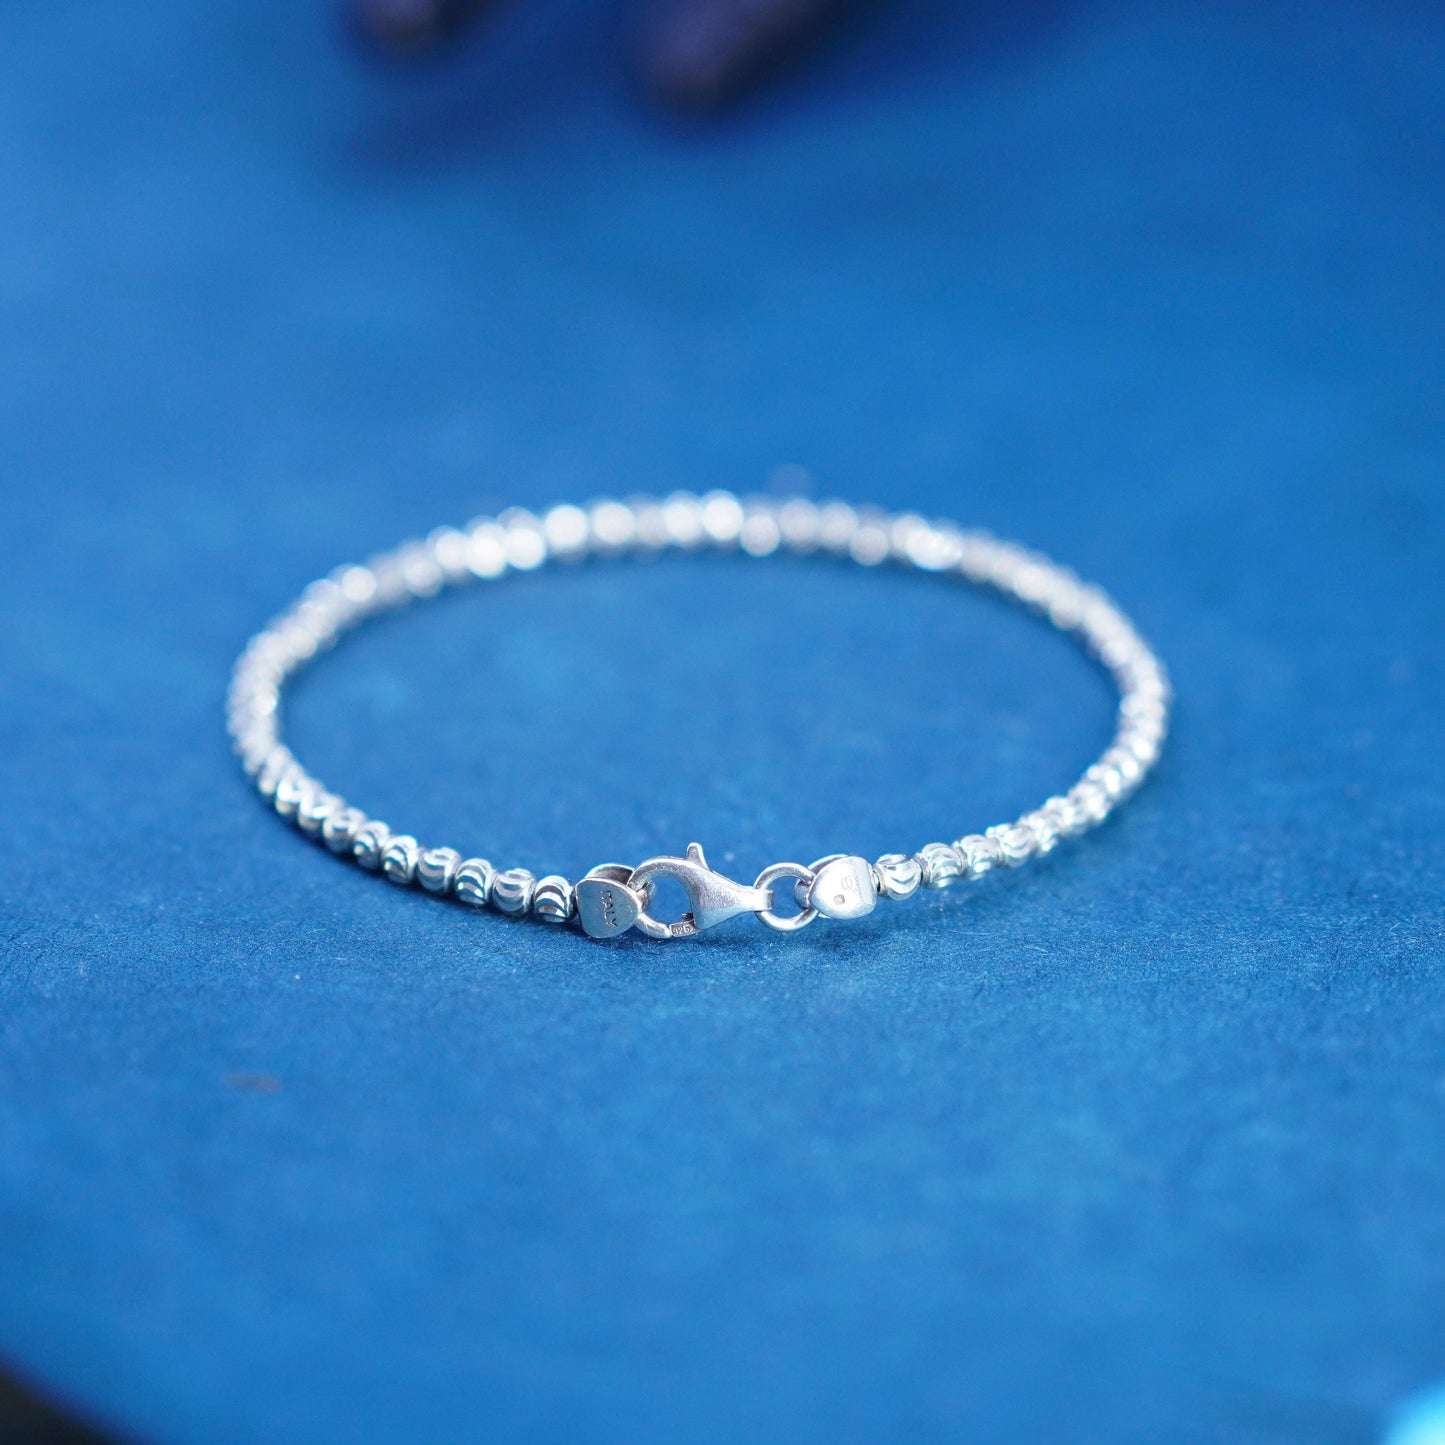 7”, Sterling silver handmade bracelet, 925 bangle with beads